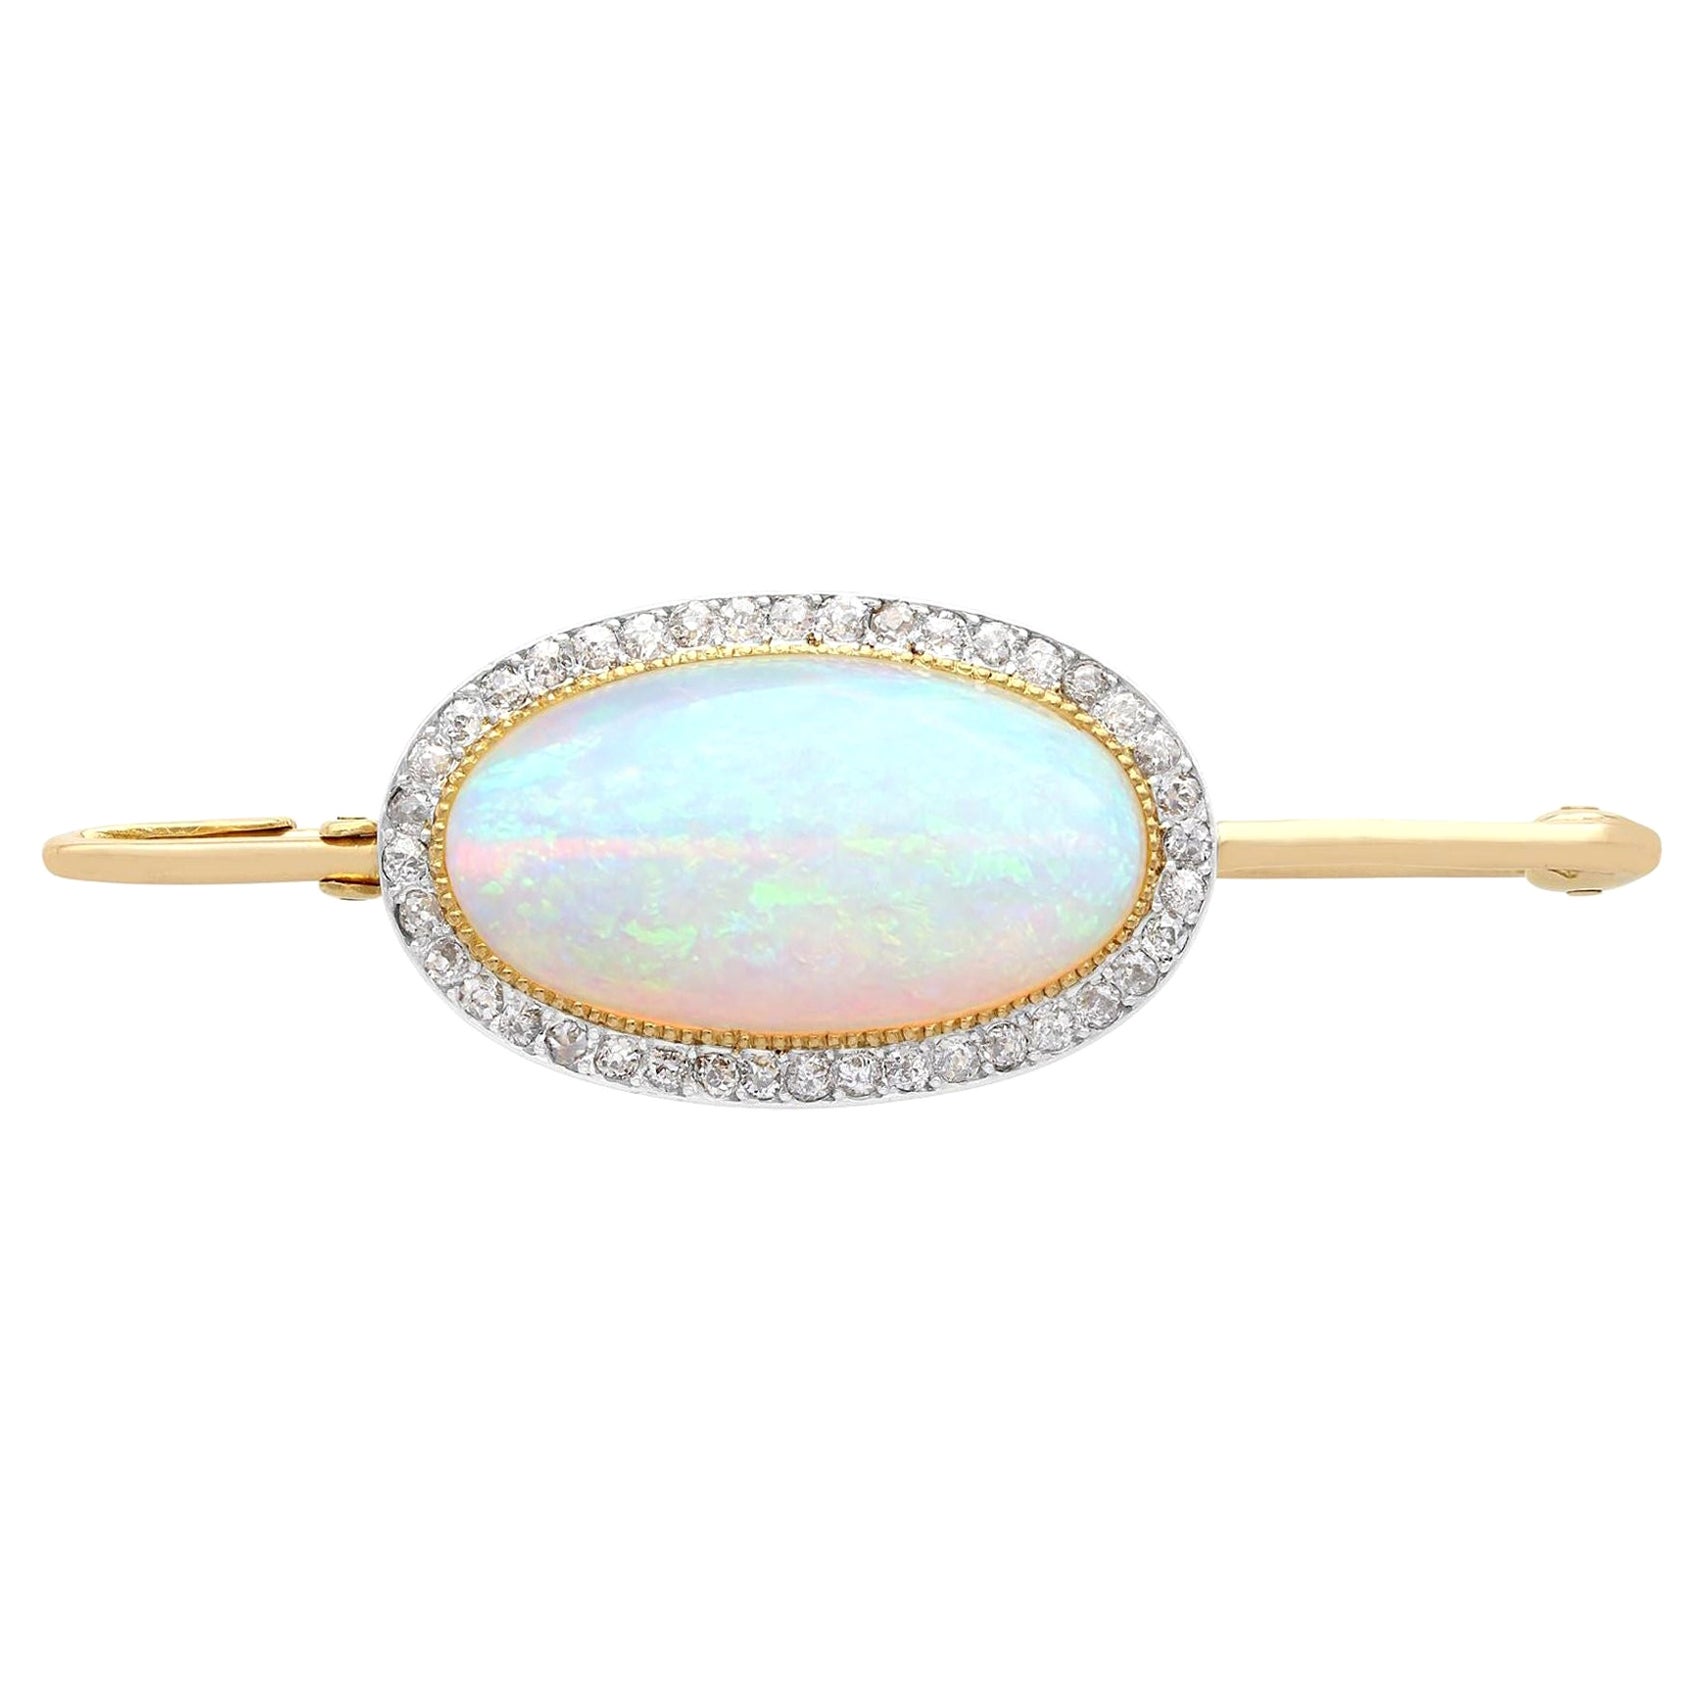 Antique French 9.30 Carat Opal and Diamond Yellow Gold Brooch